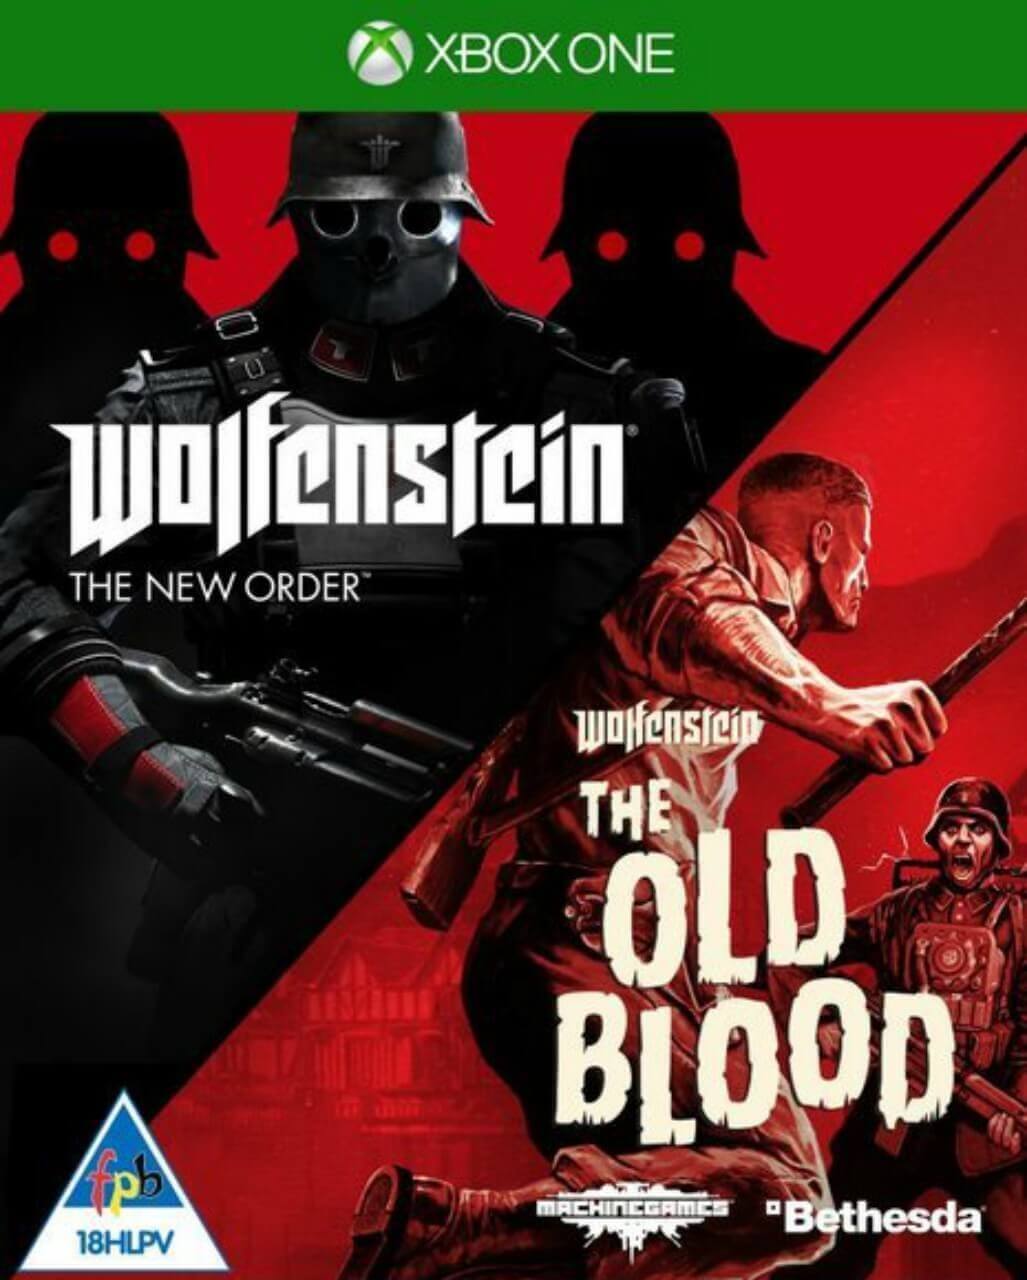 Wolfenstein The New Order and The Old Blood Double Pack